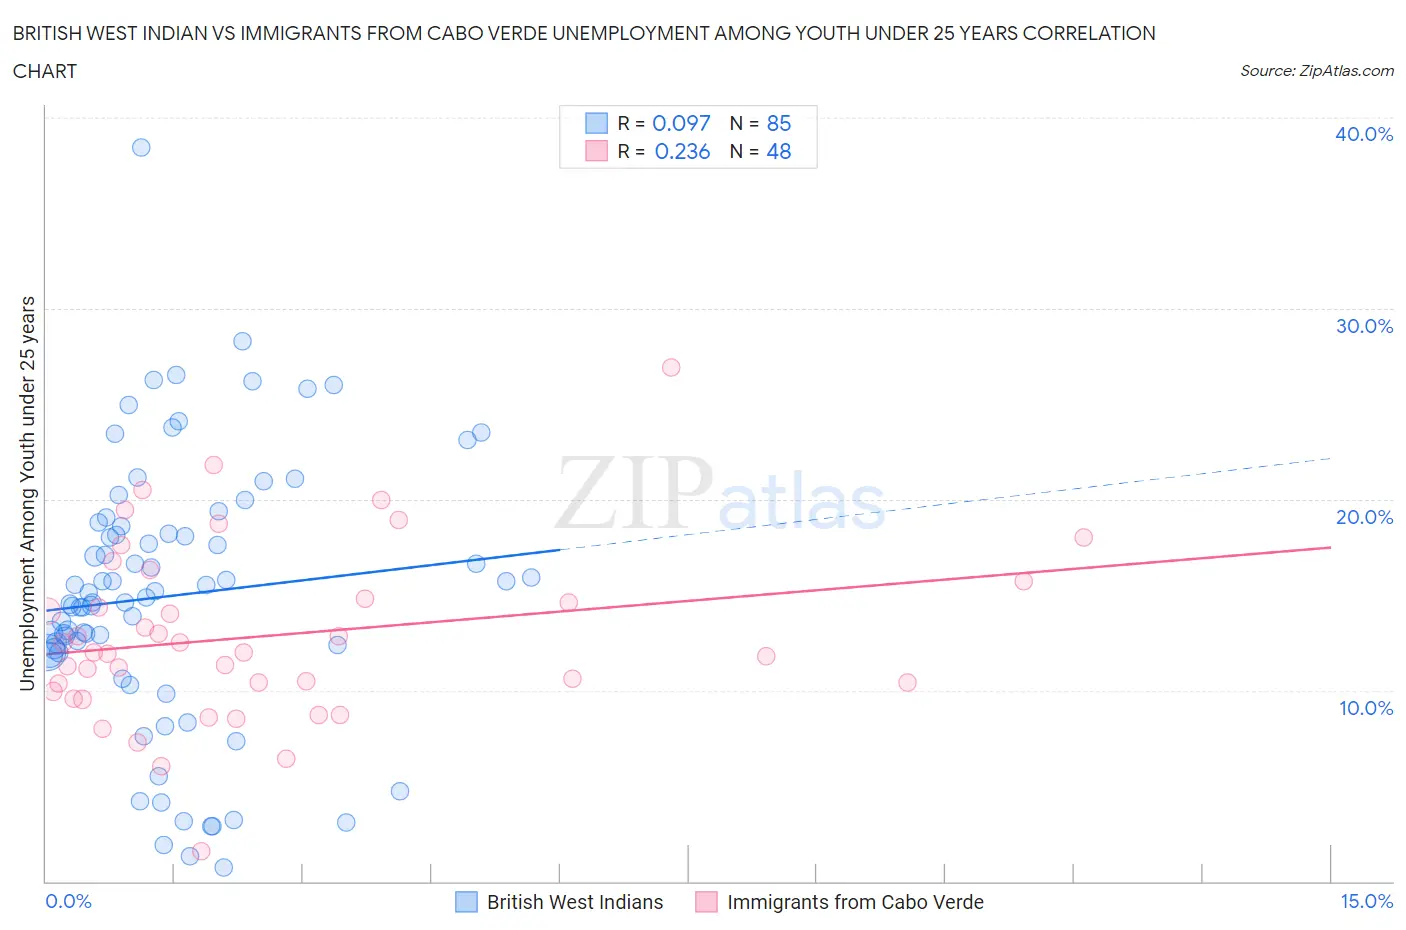 British West Indian vs Immigrants from Cabo Verde Unemployment Among Youth under 25 years